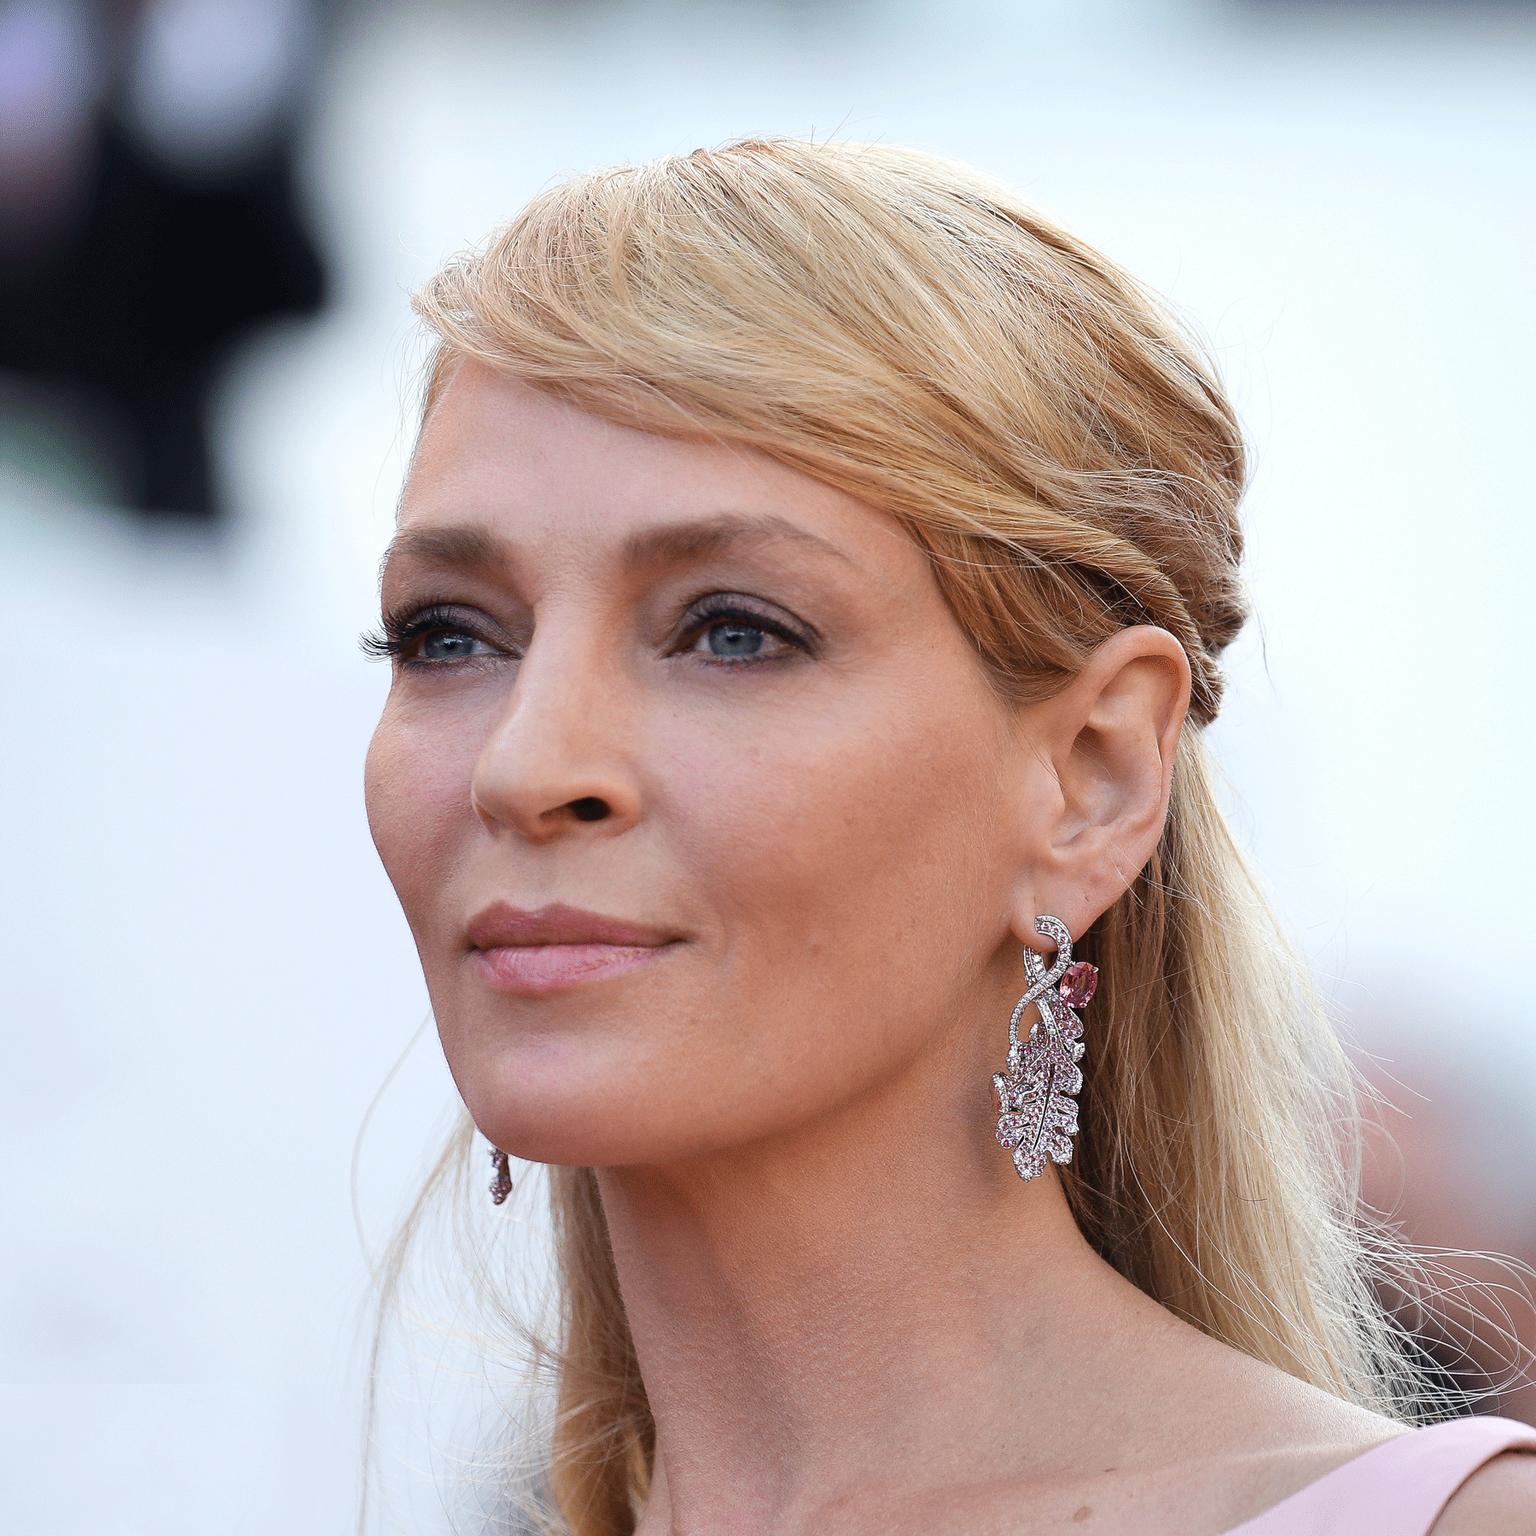 Uma Thurman at Cannes 2017 in Chaumet